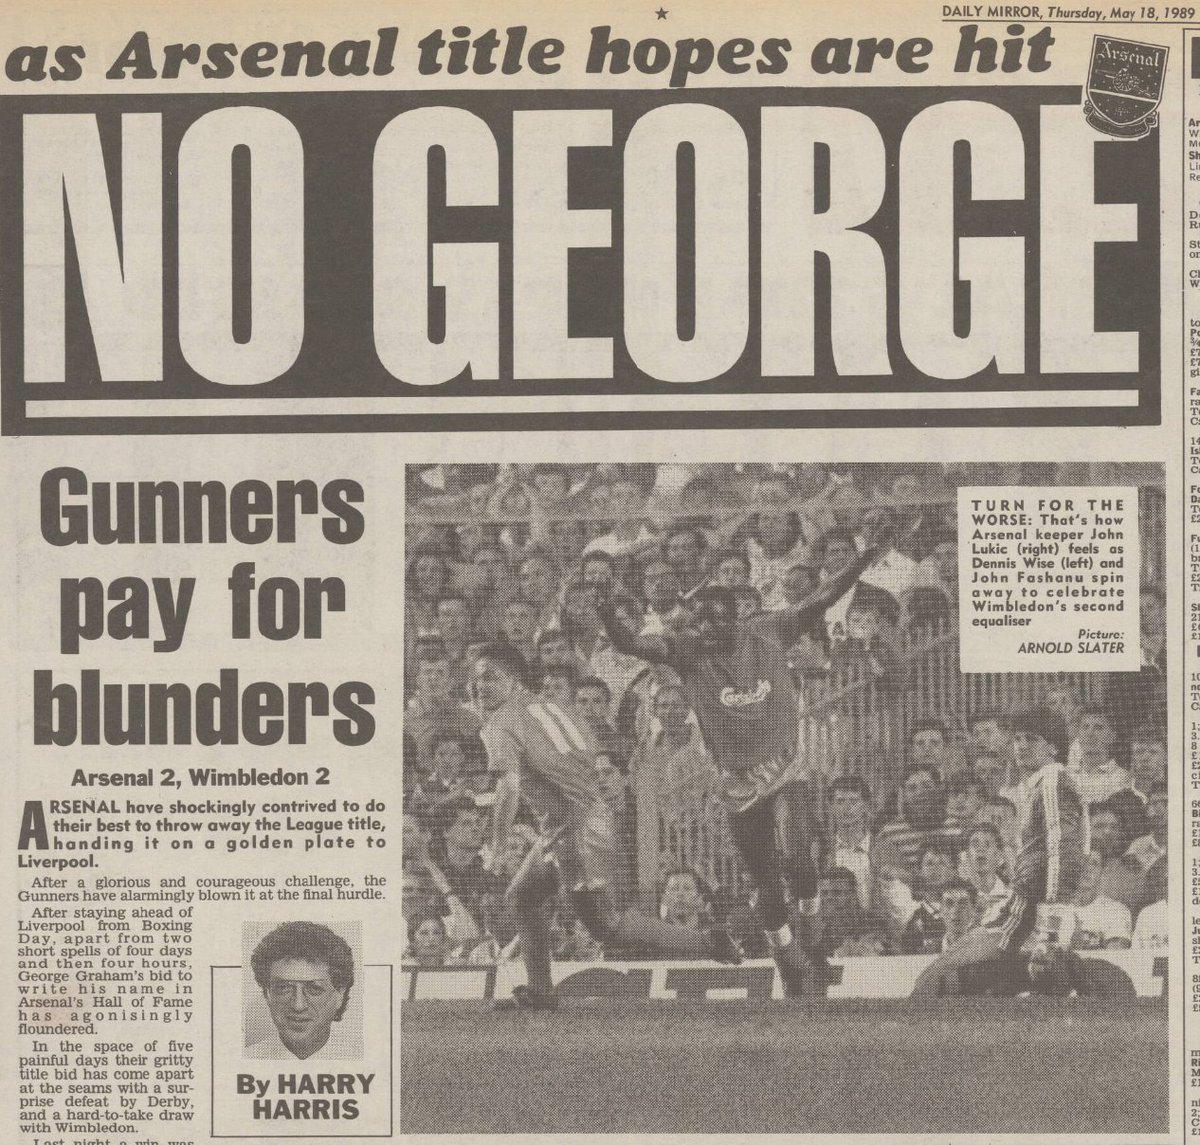 #Arsenal's 1989 vibes! #WHUARS

* Gunners pay for blunders.
* Gunners have alarmingly blown it..
* ..has agonisingly floundered.
* ..hard-to-take draw
* ..win was the only acceptable result.

#COYG!